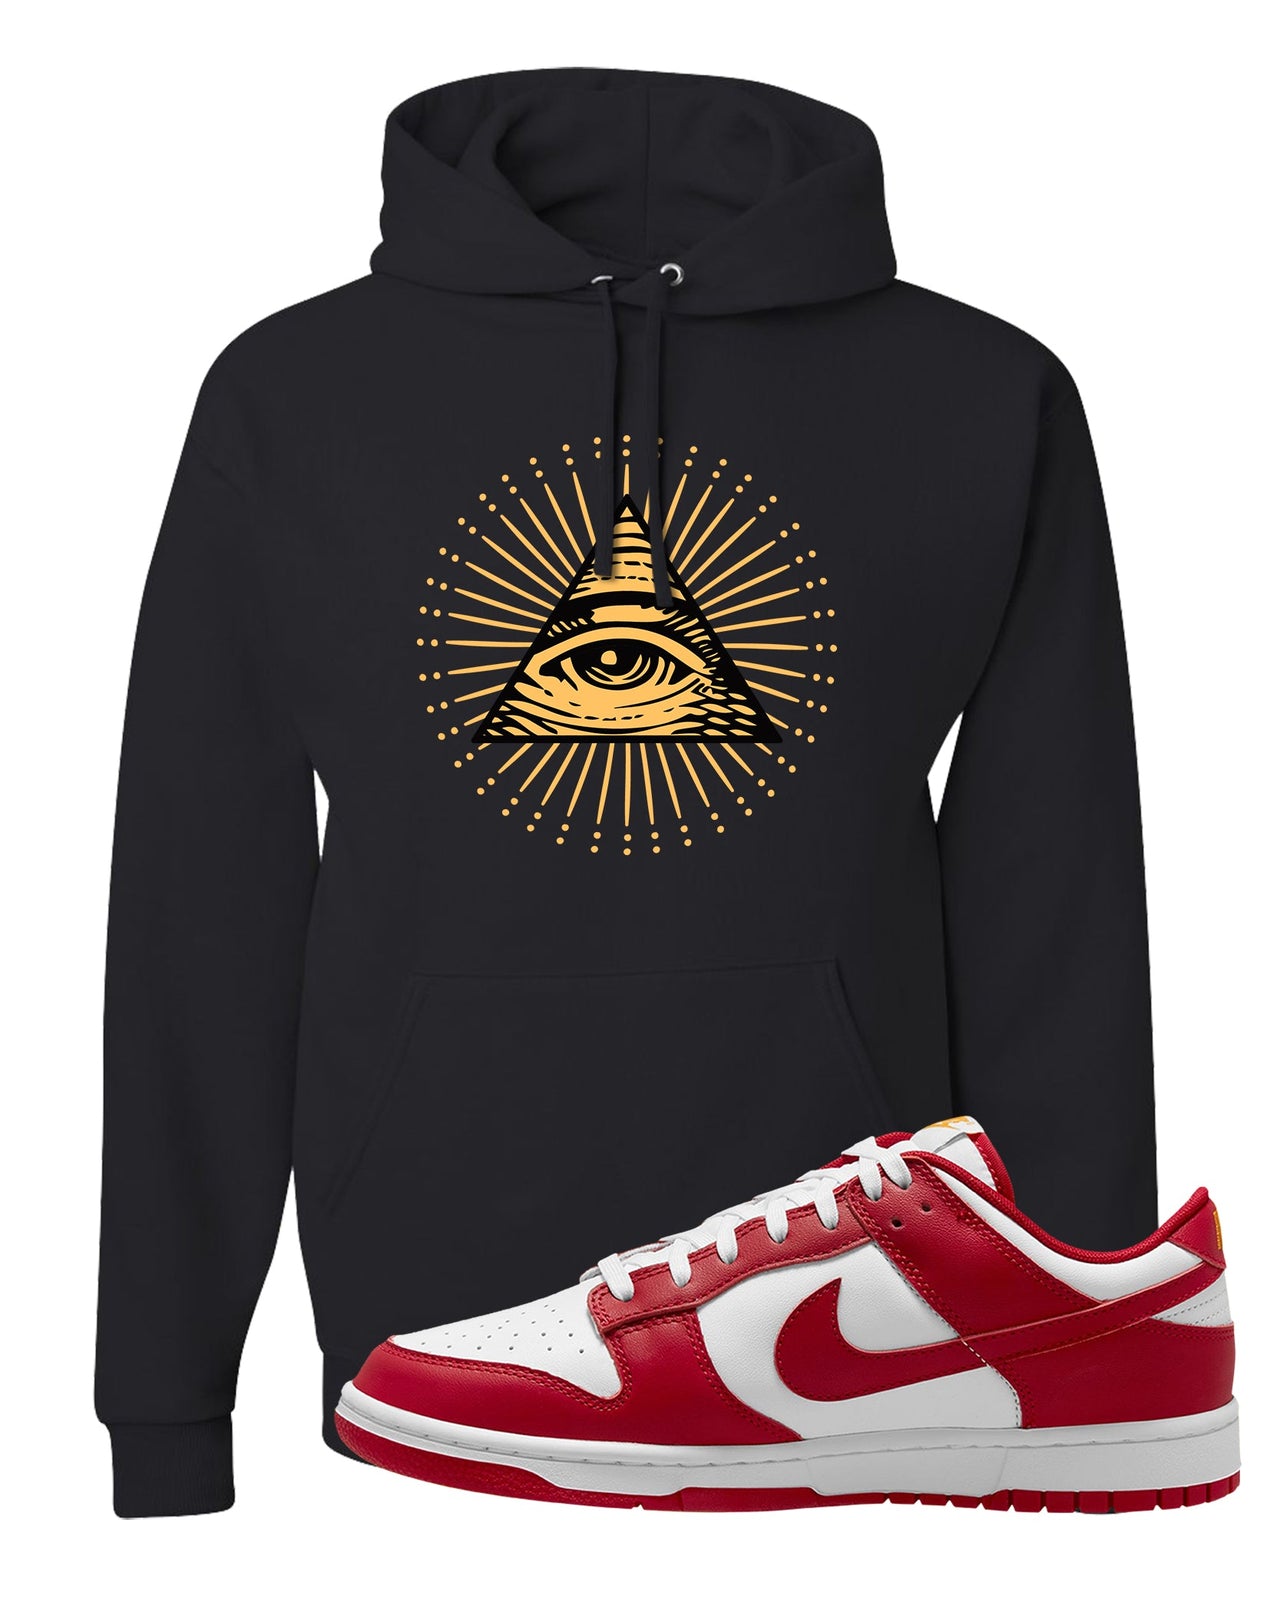 Red White Yellow Low Dunks Hoodie | All Seeing Eye, Black